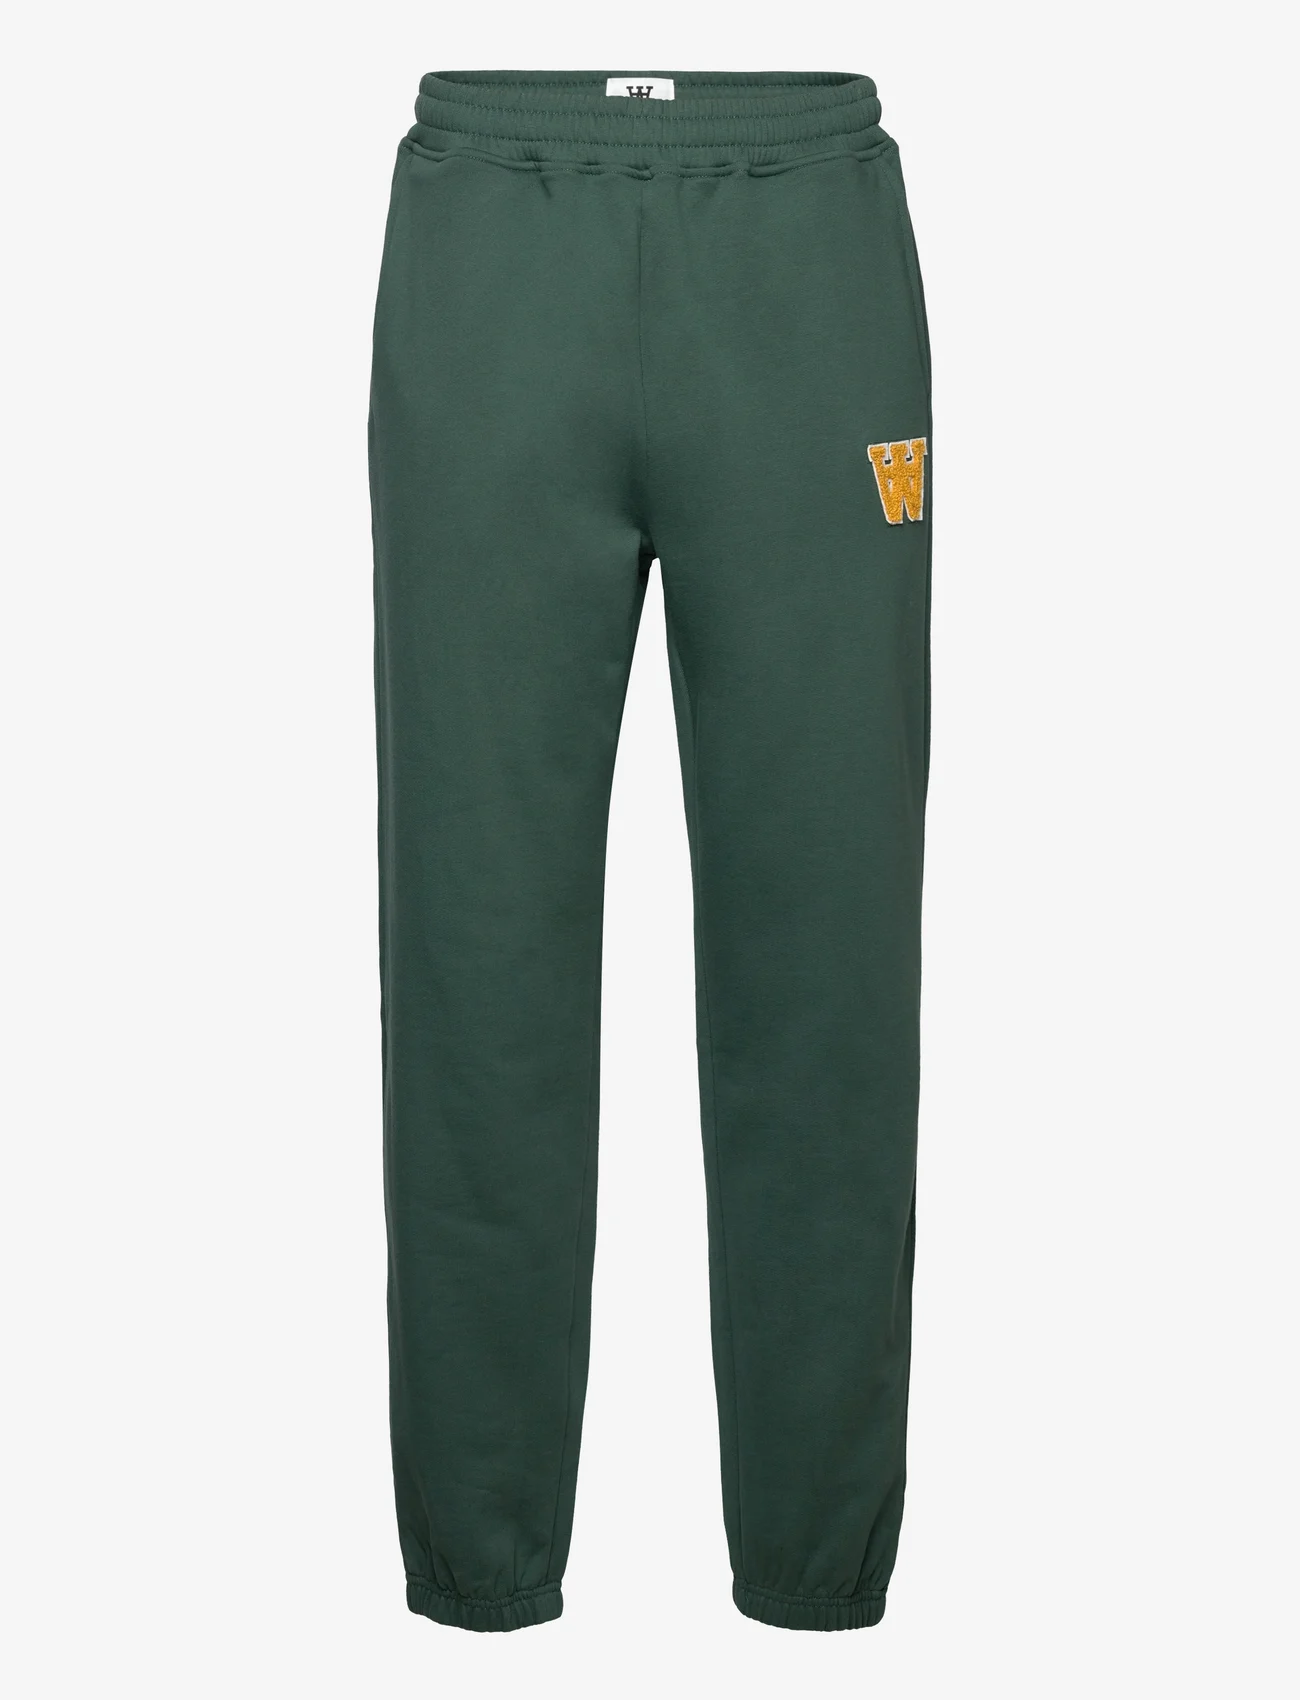 Double A by Wood Wood - Cal joggers - sporta bikses - forest green - 0